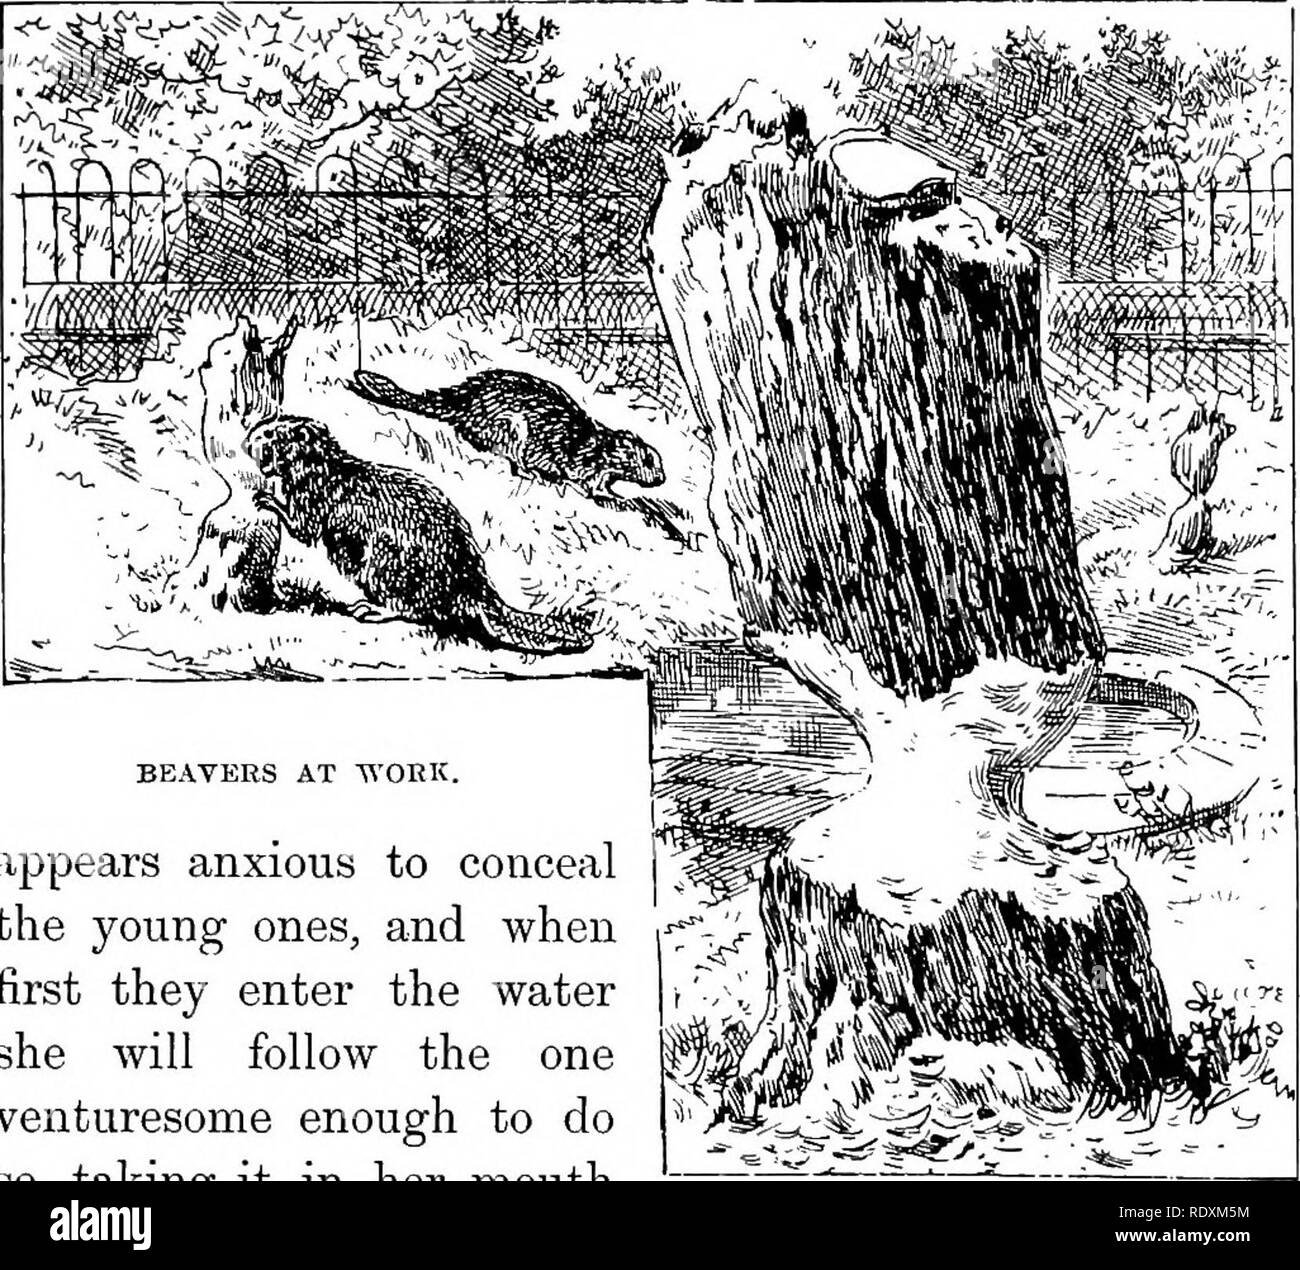 Wild animals in captivity; being an account of the habits, food, management  and treatment of the beasts and birds at the "Zoo", with  reminiscences and anecdotes. Animal behavior. BEA VERS squirrel